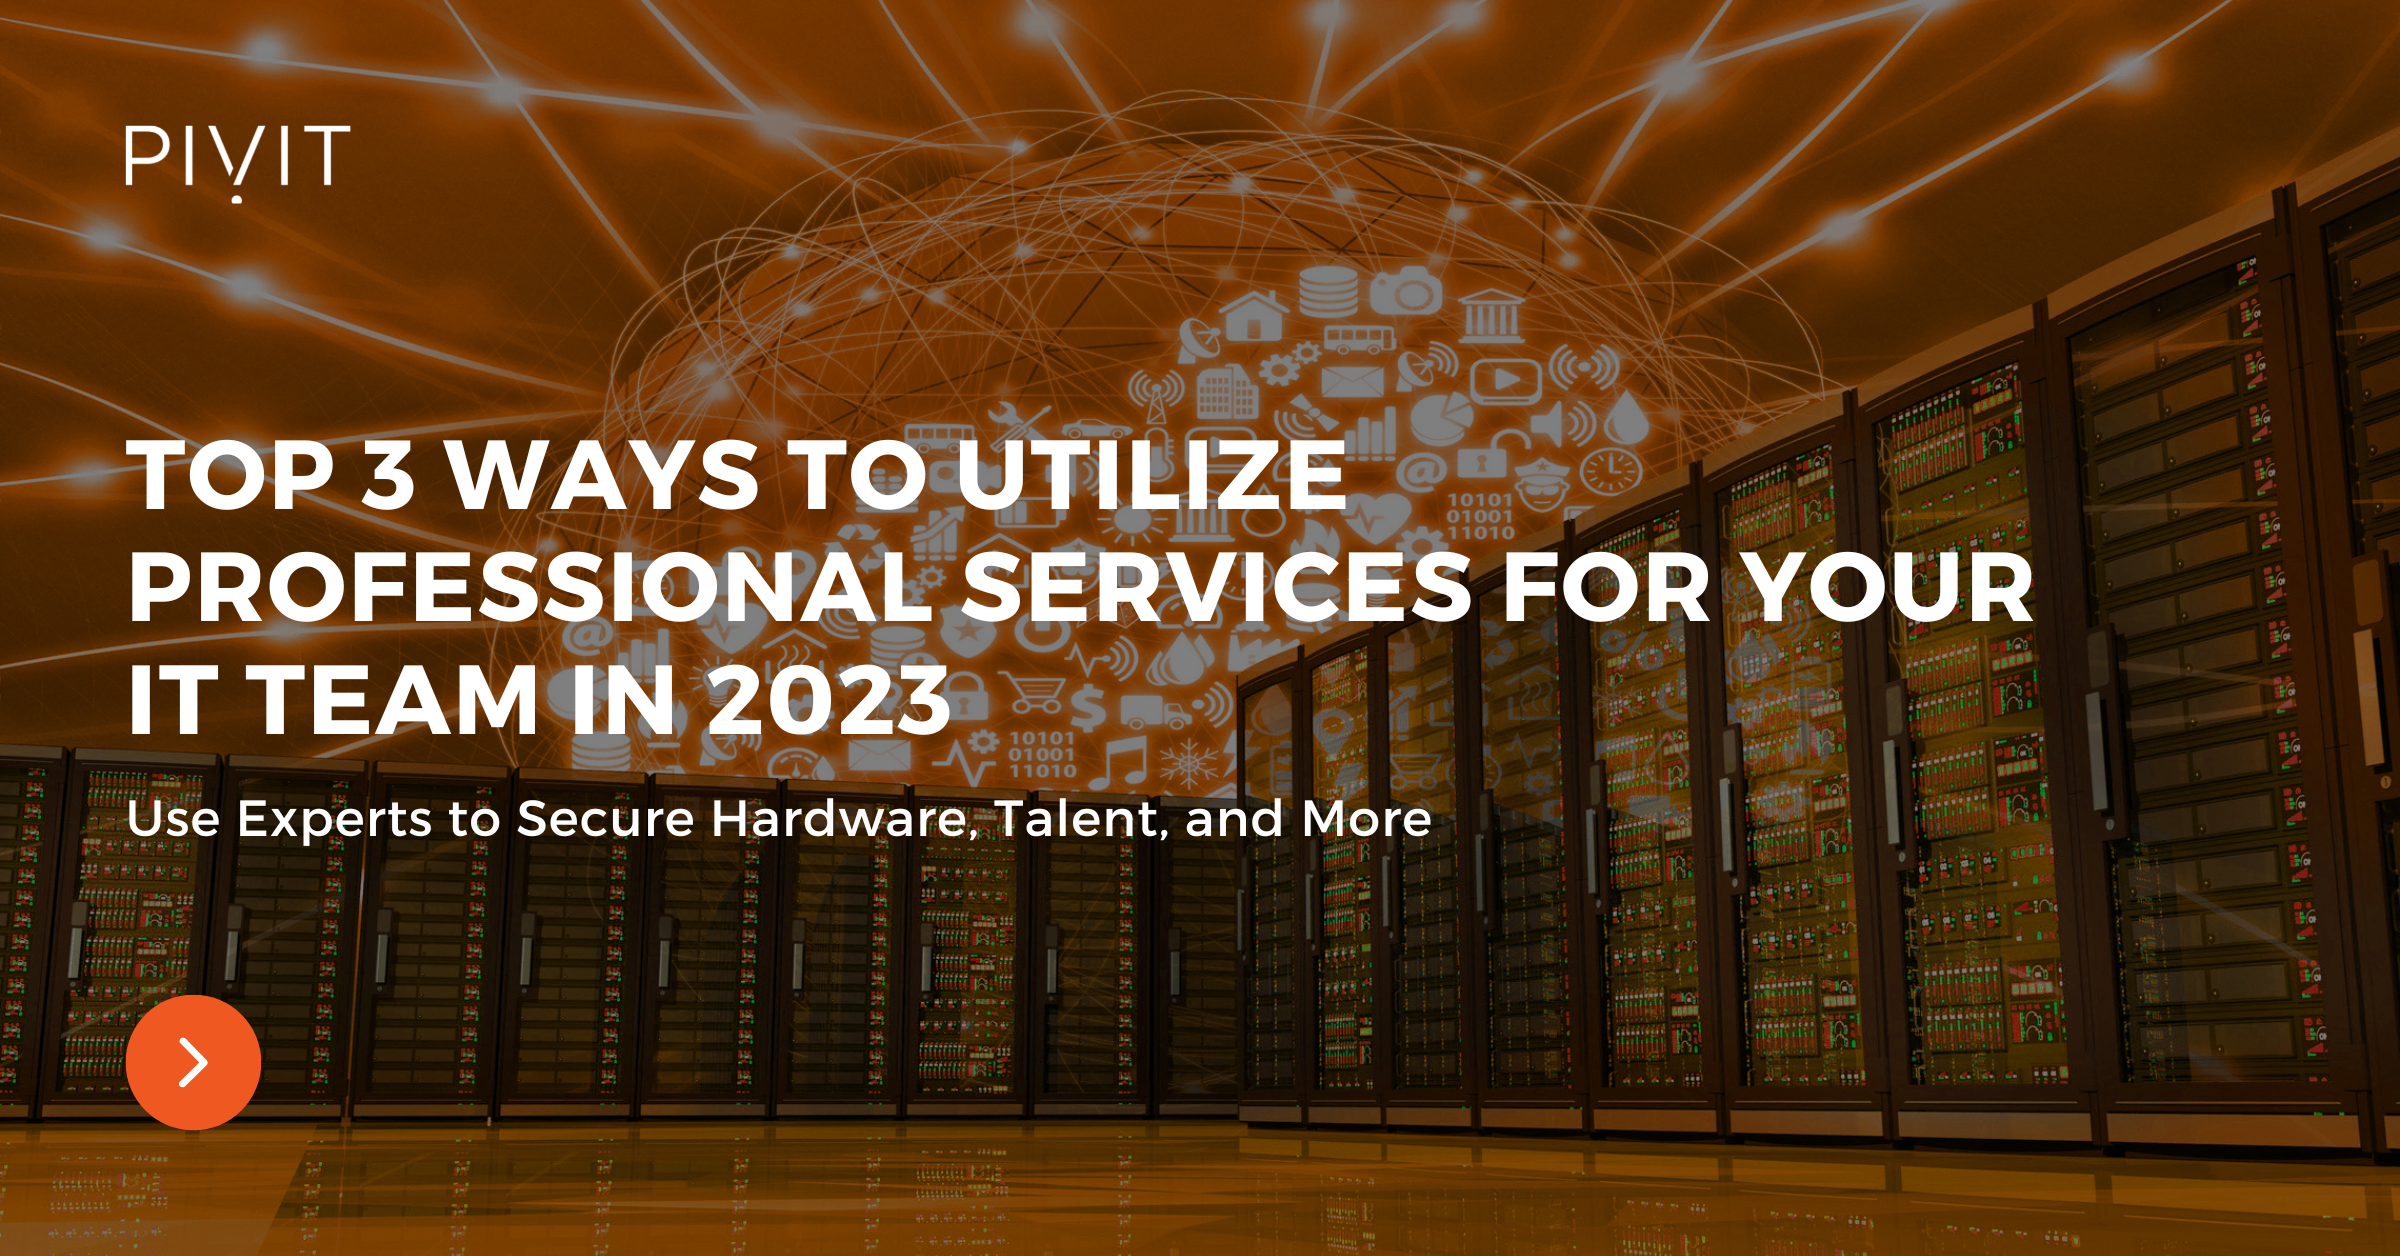 Top 3 Ways to Utilize Professional Services for Your IT Team in 2023 - Use Experts to Secure Hardware, Talent, and More